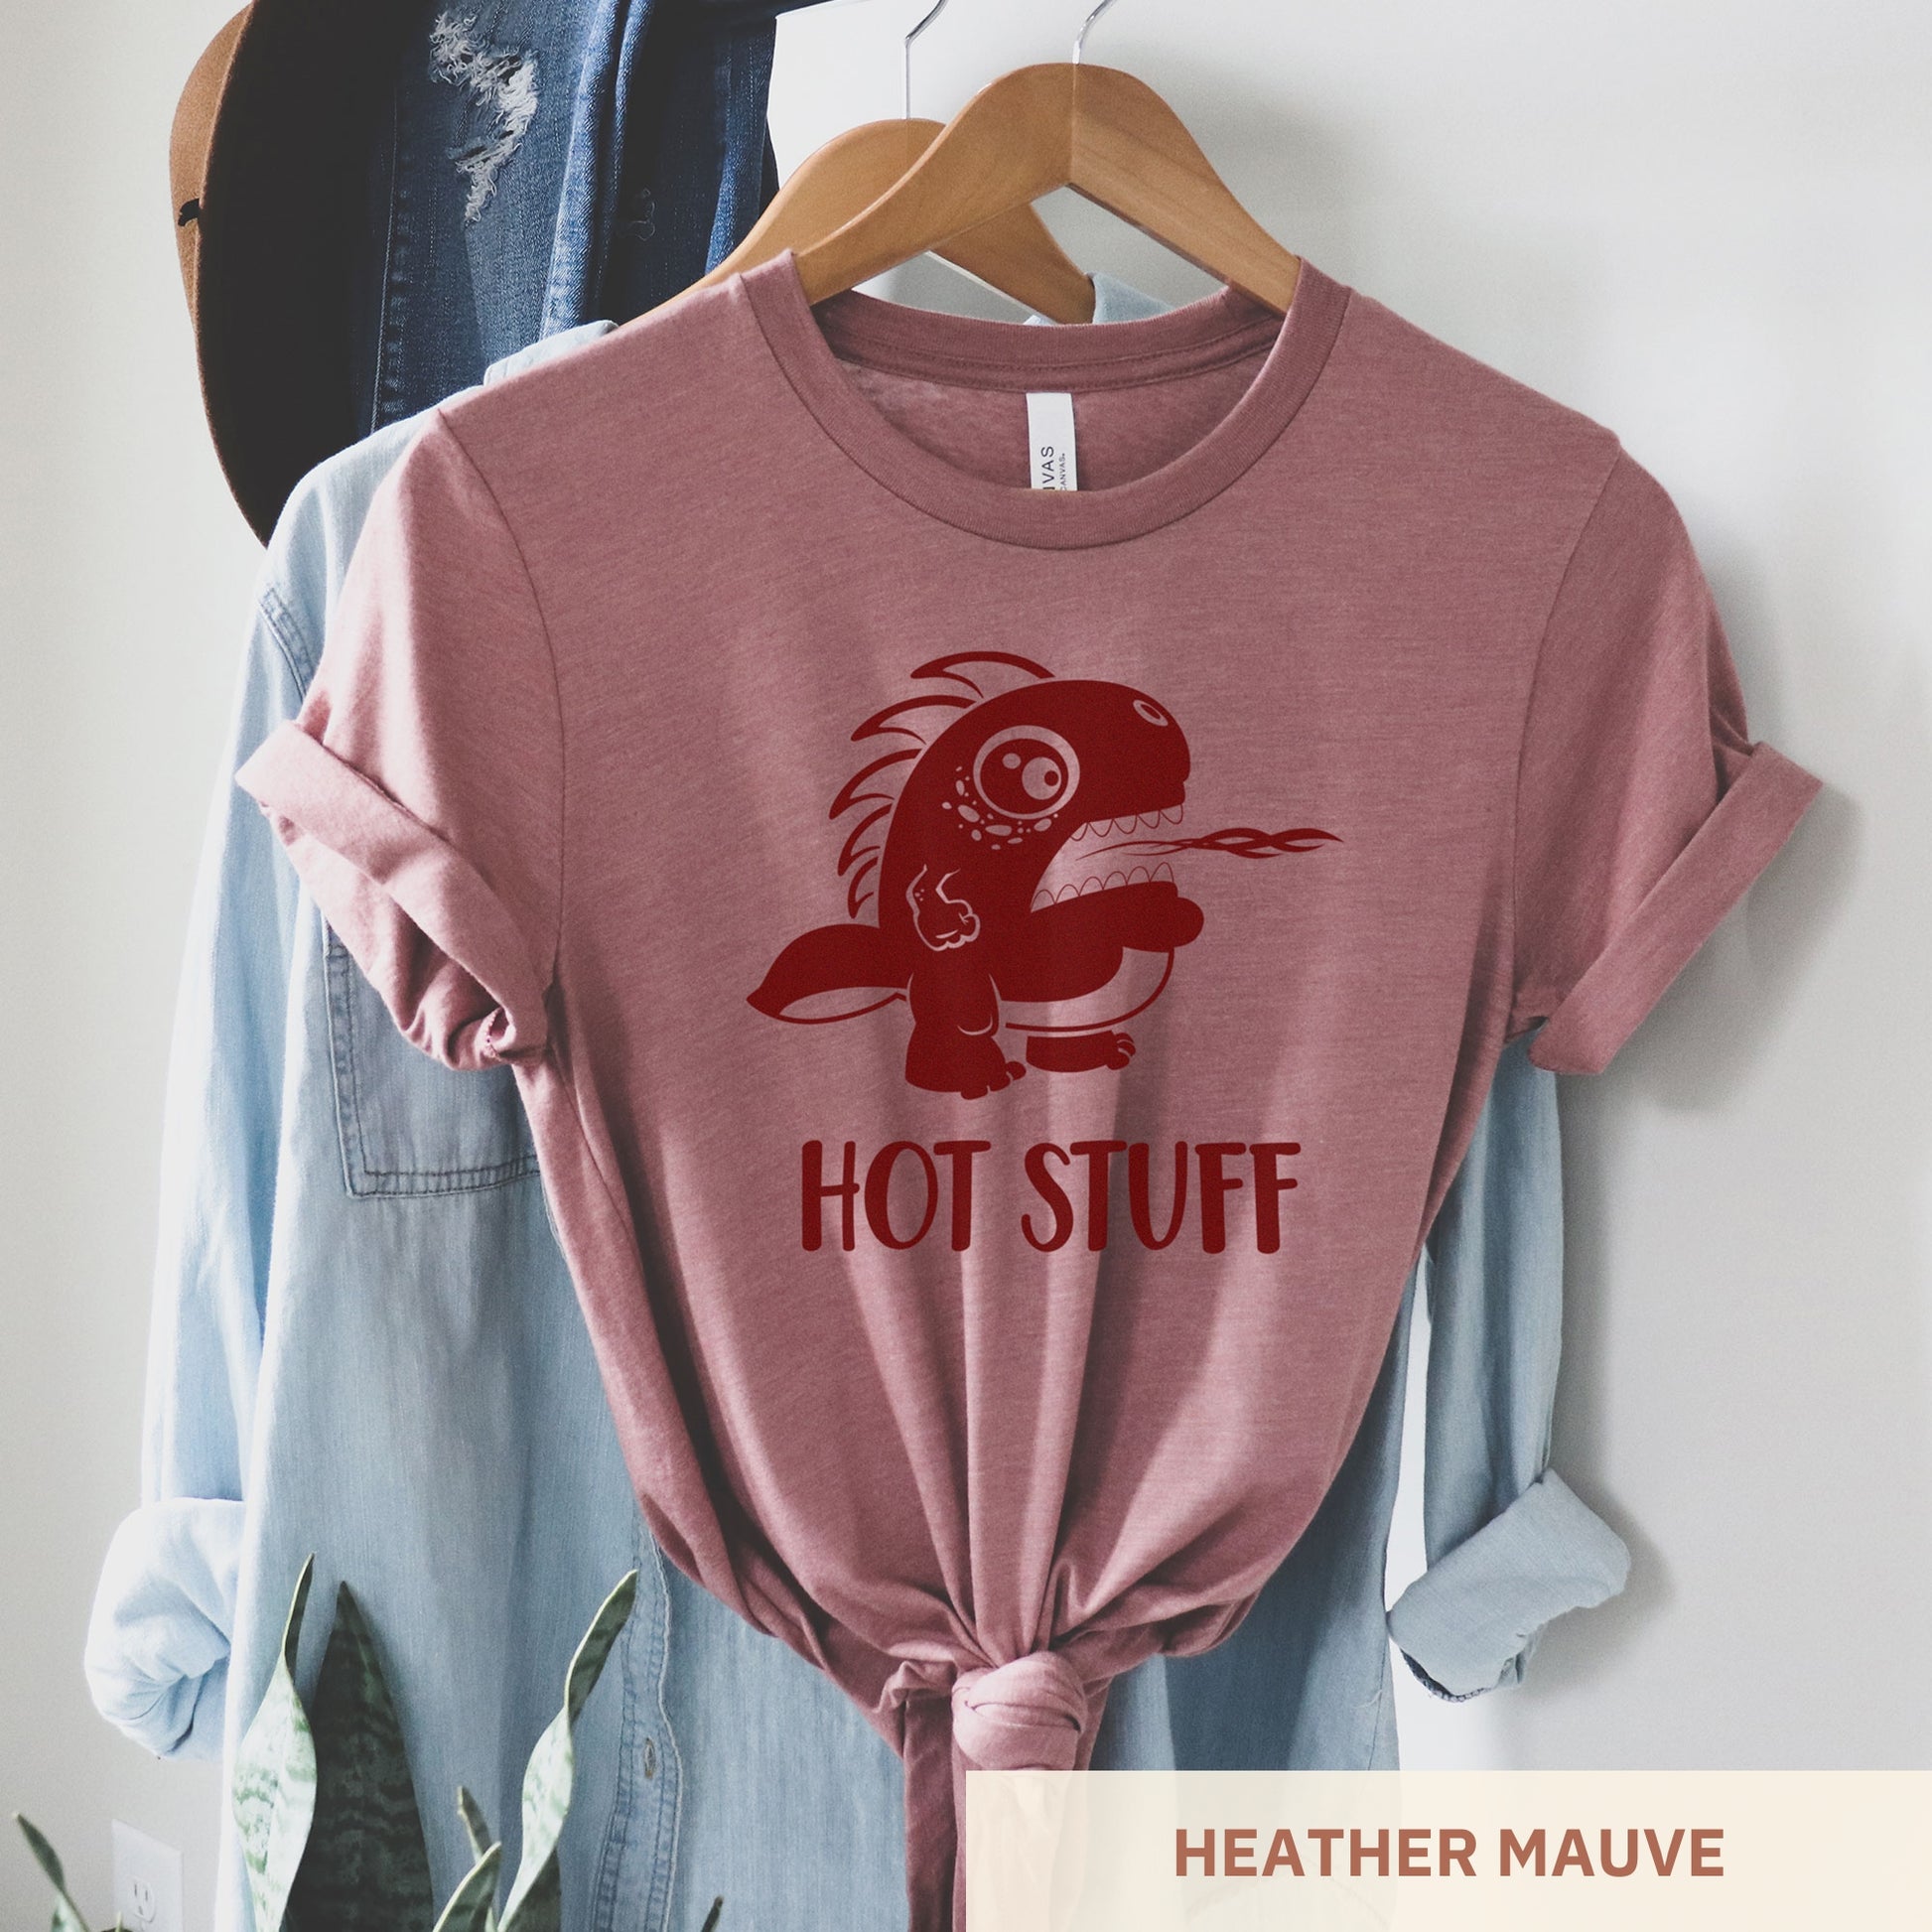 A hanging heather mauve Bella Canvas t-shirt wearing a cute cartoon monster that is belching fire with the words hot stuff.